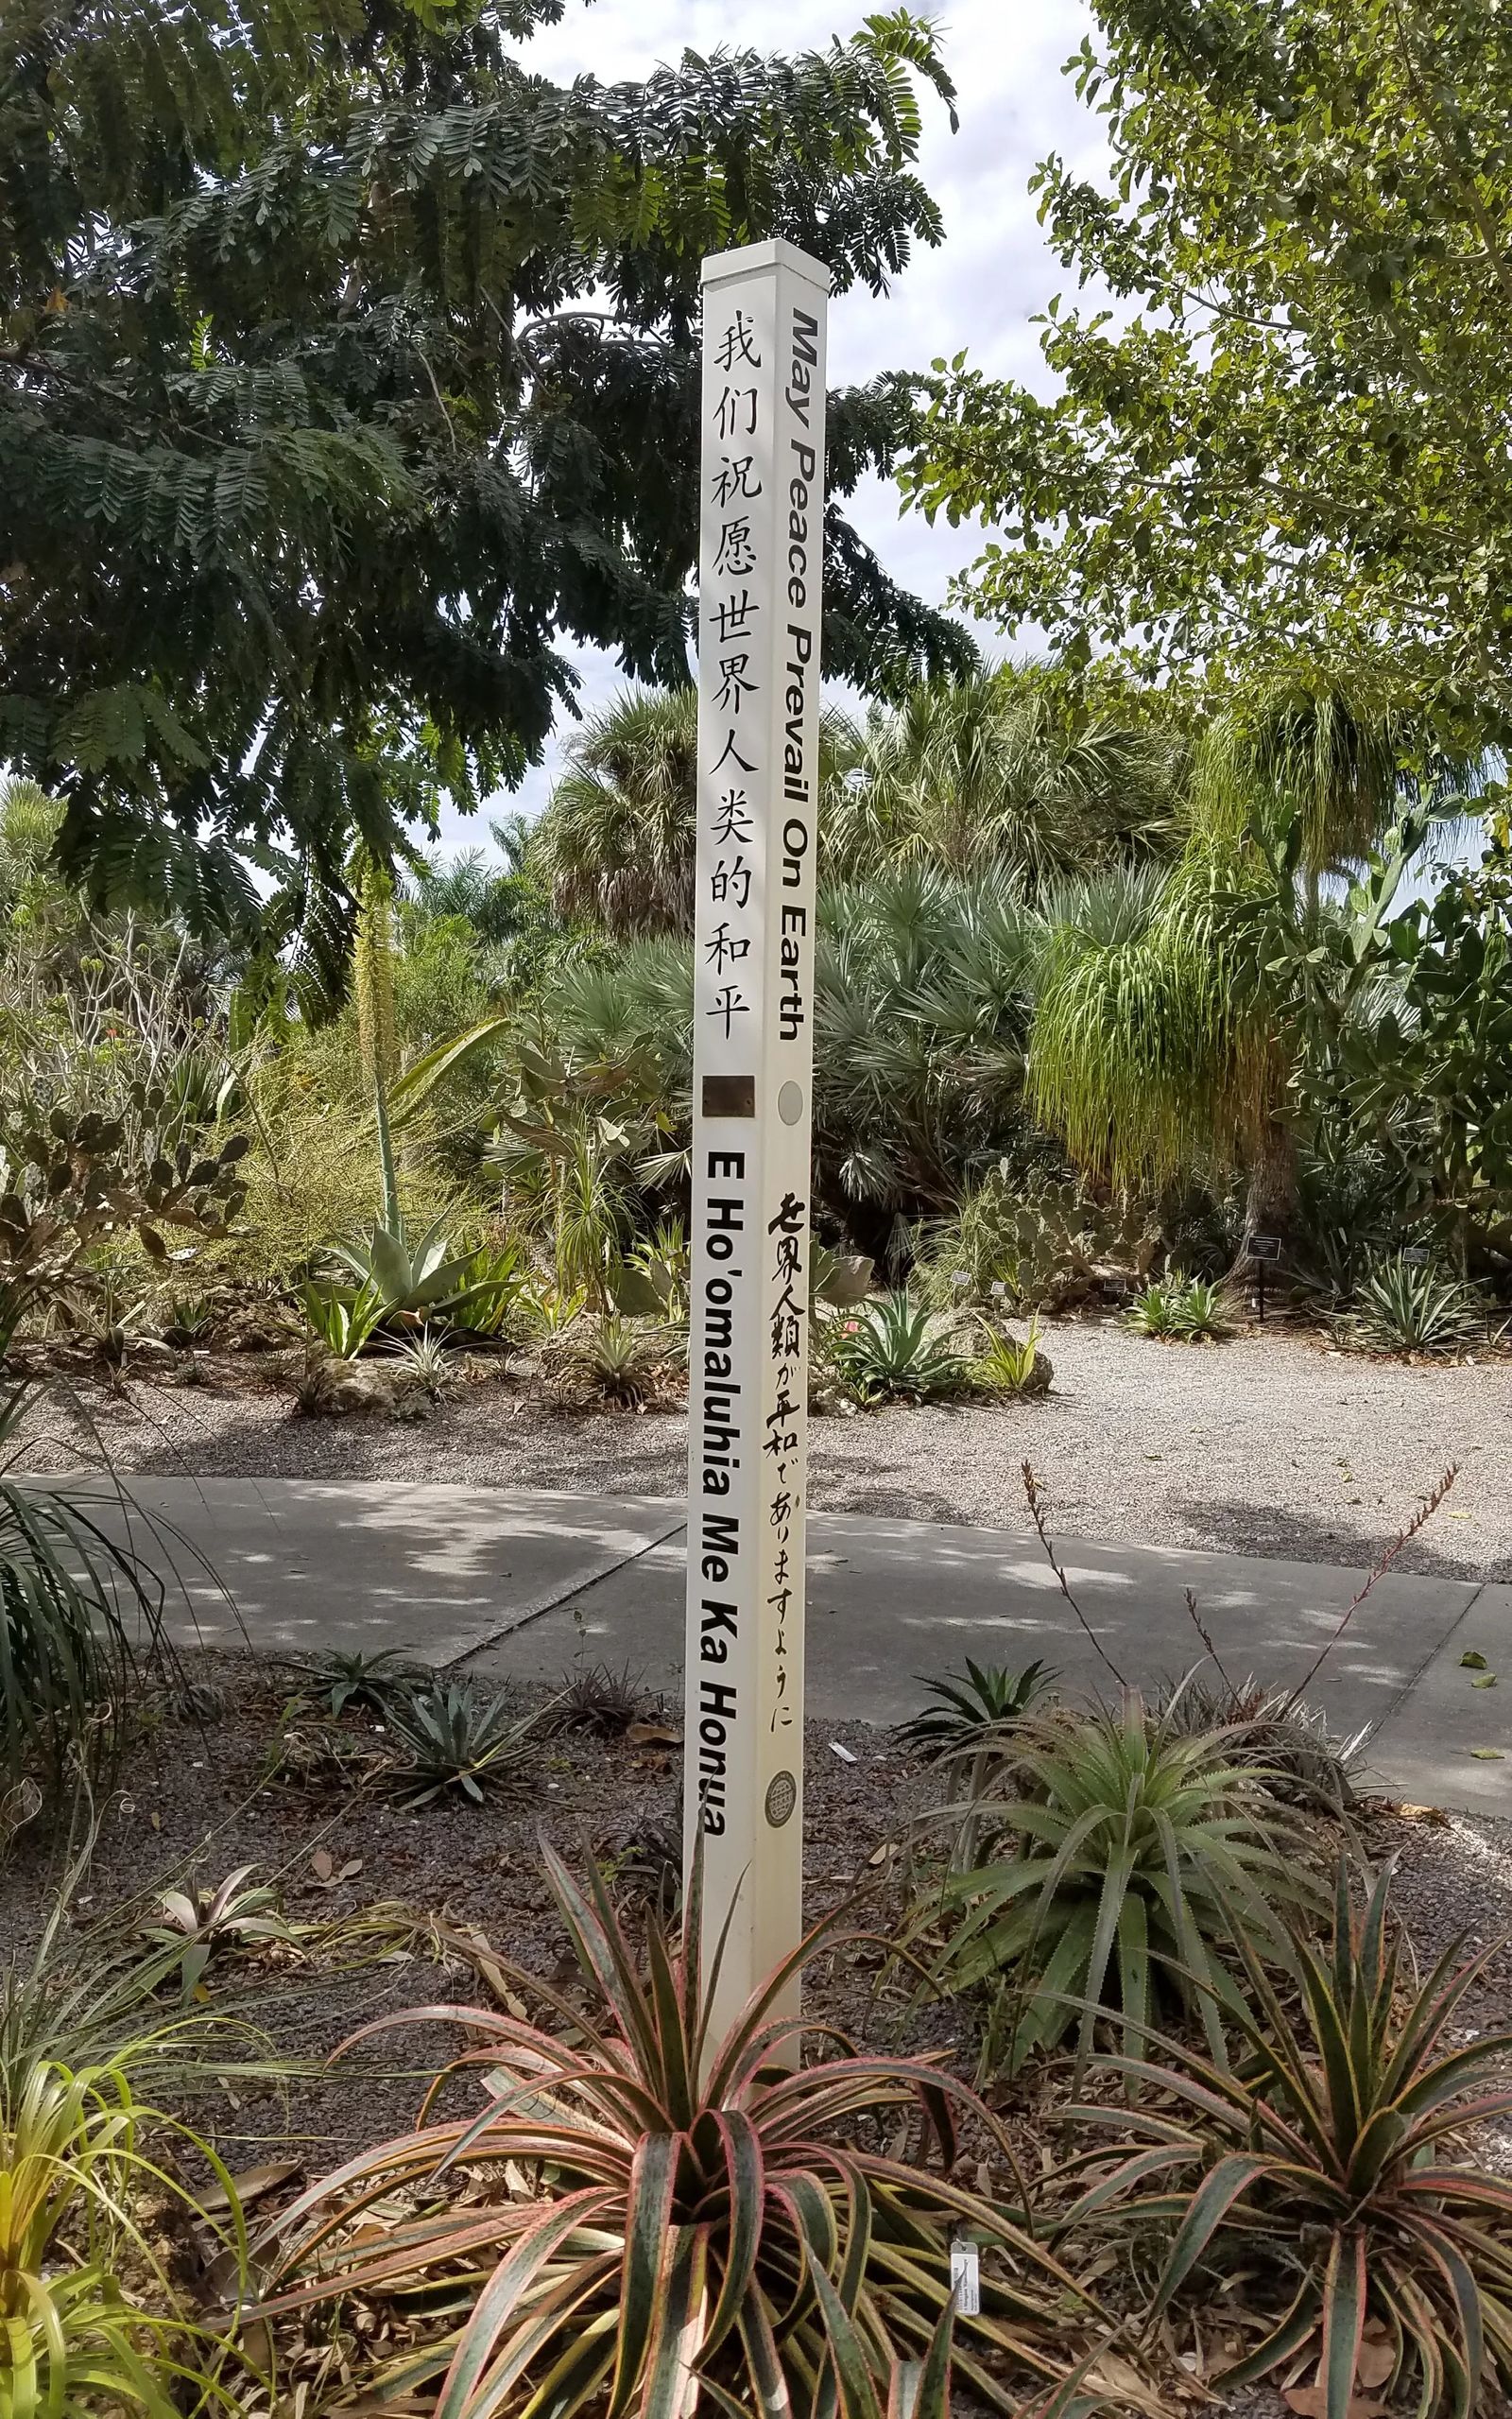 Photo of the Peace Pole in the Naples Botanical Garden in Naples, Florida